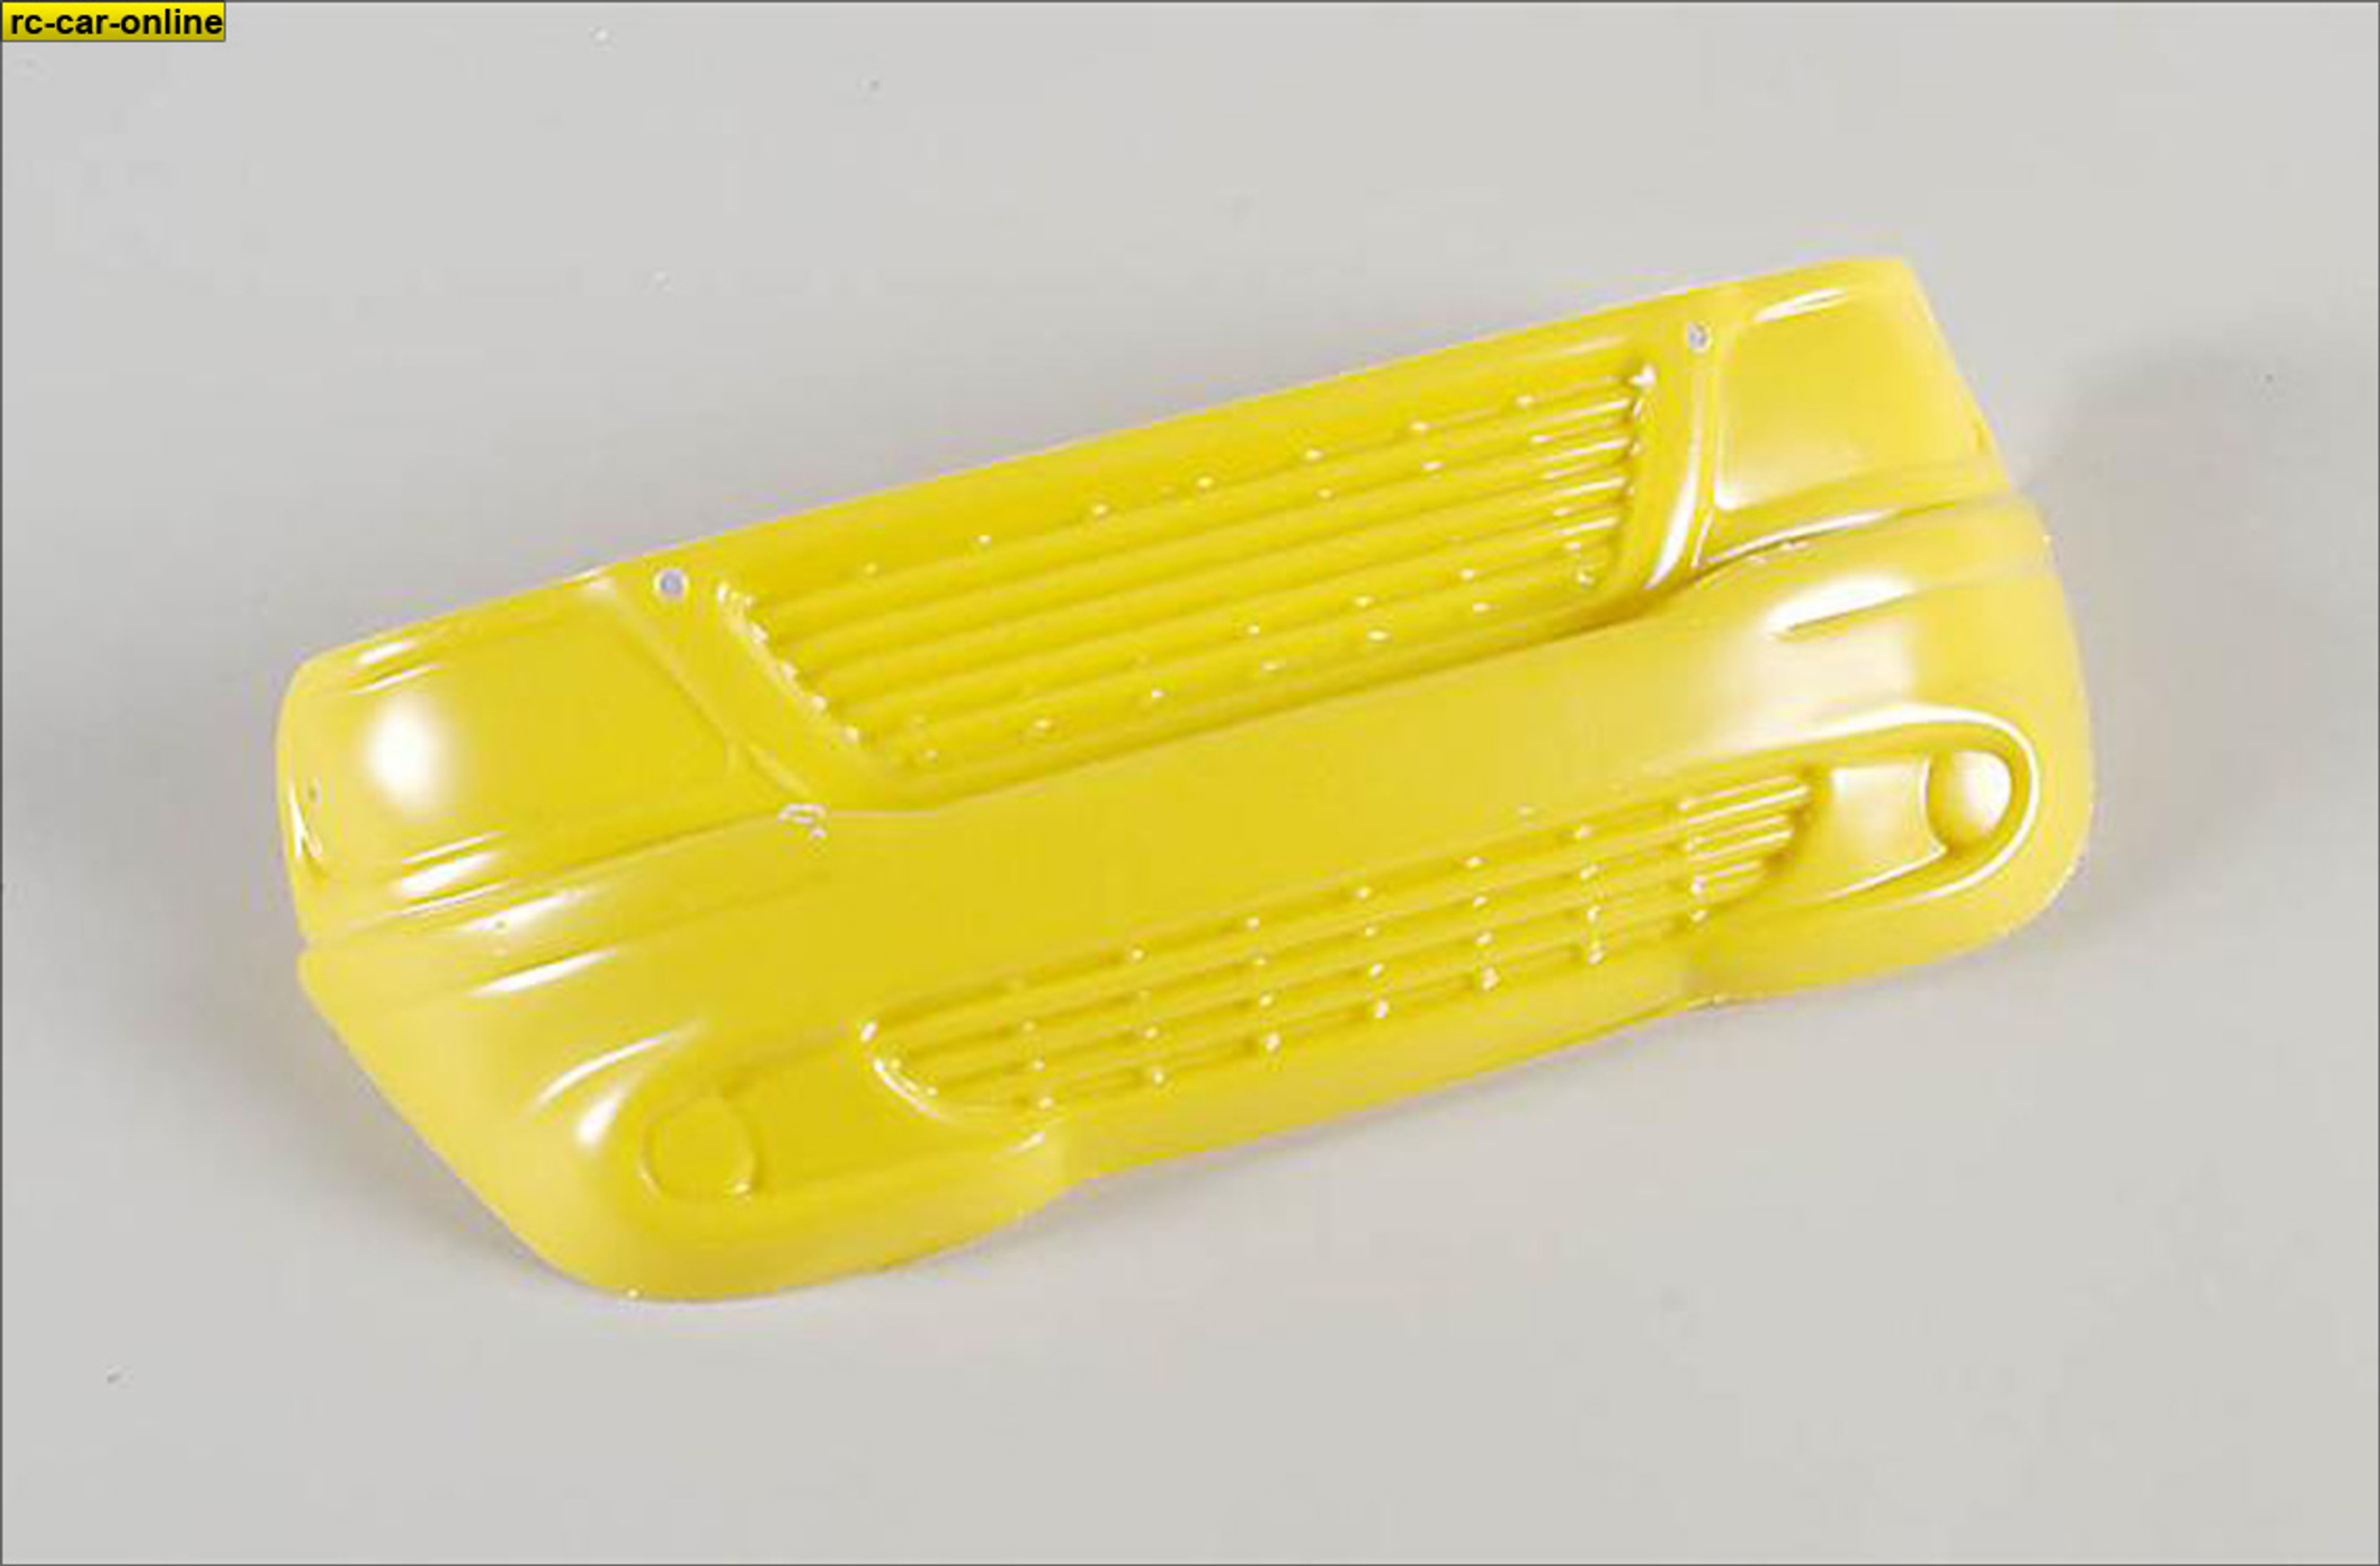 23110/02 FG Front body Monster Truck WB 535, yellow, 1 pce.